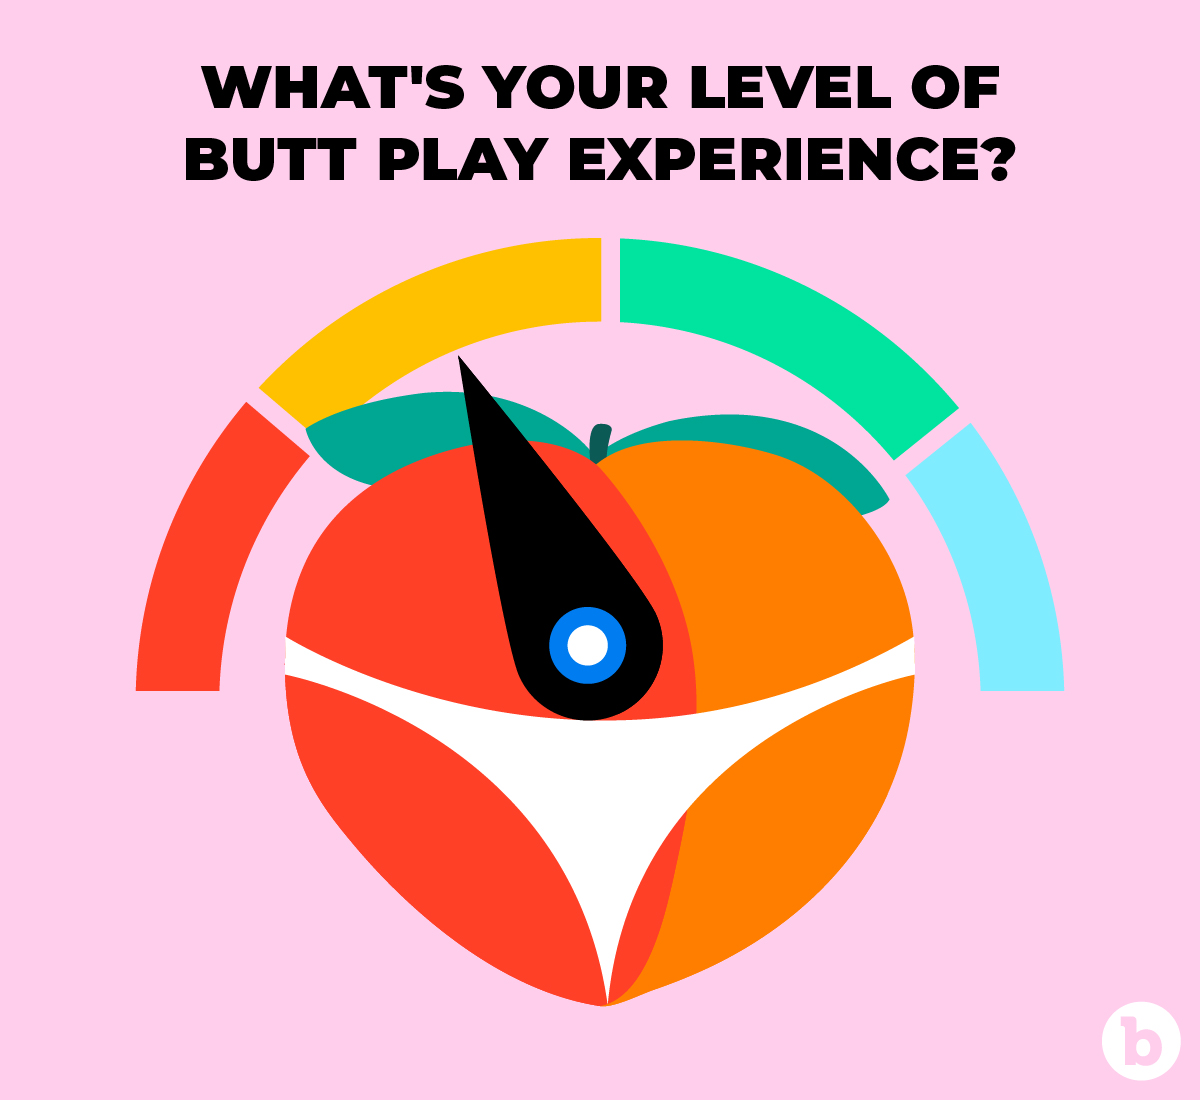 Your level of experience will anal play will help you determine which butt toy to buy